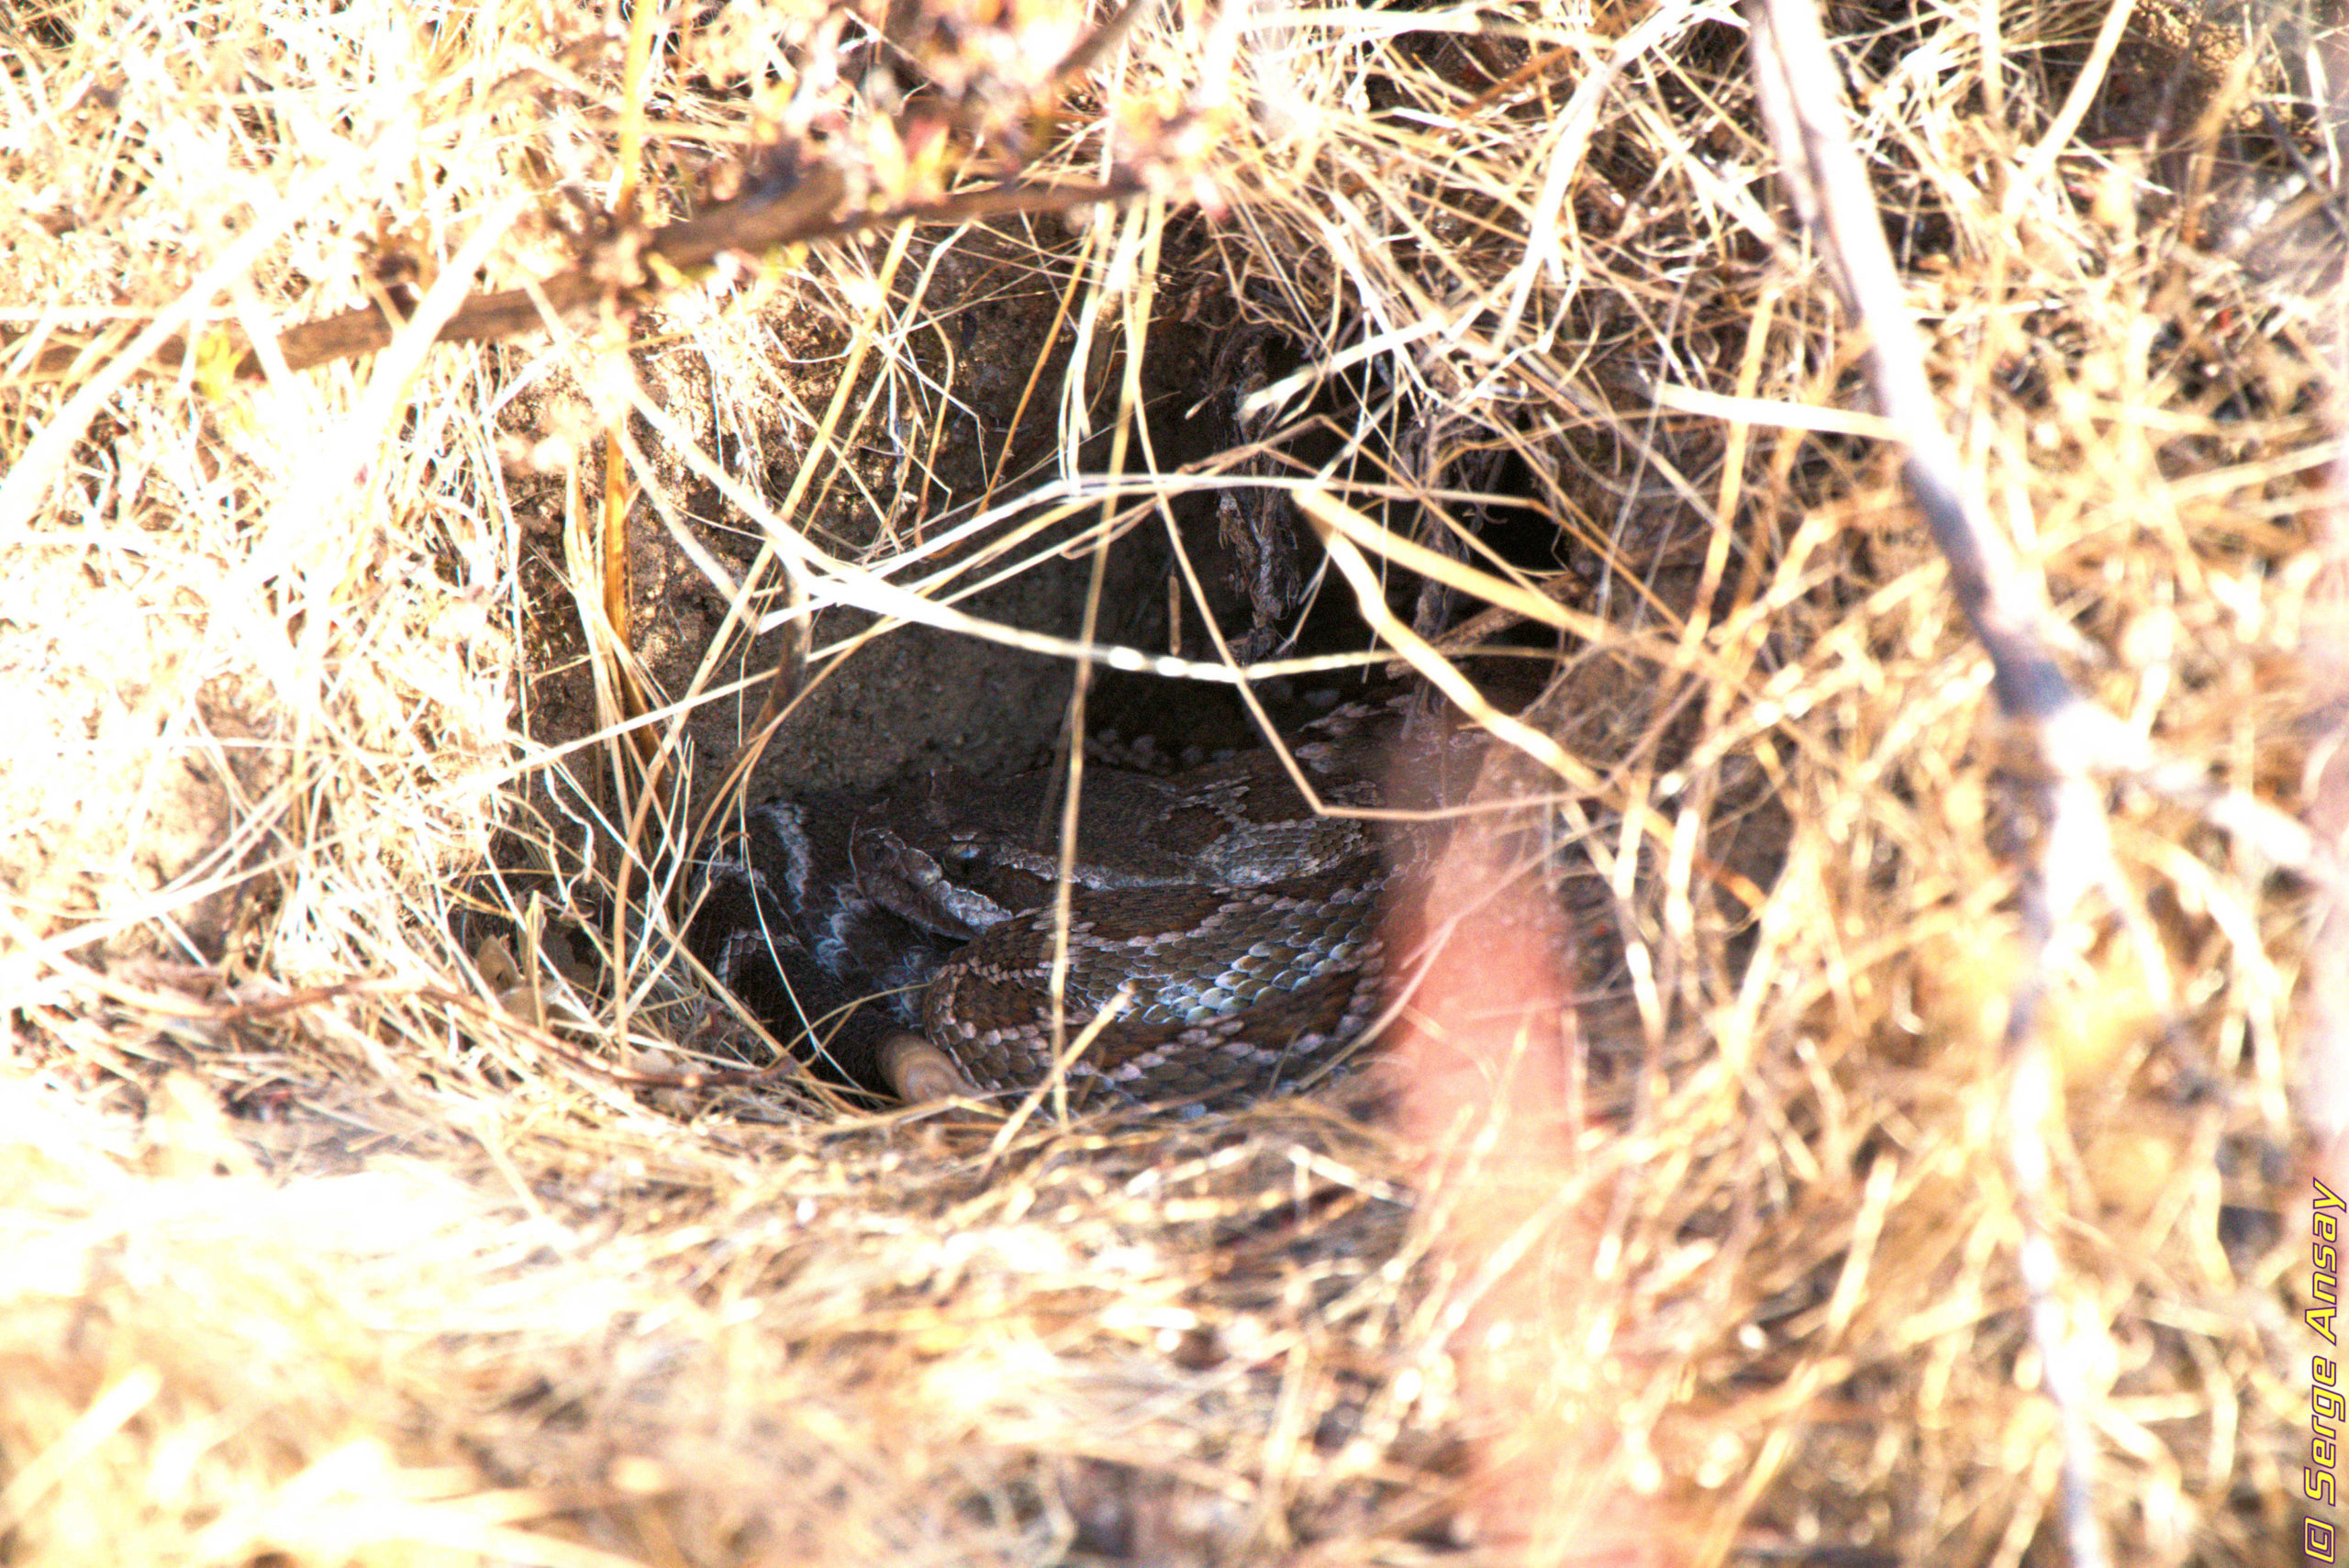 Rattlesnake in a hole